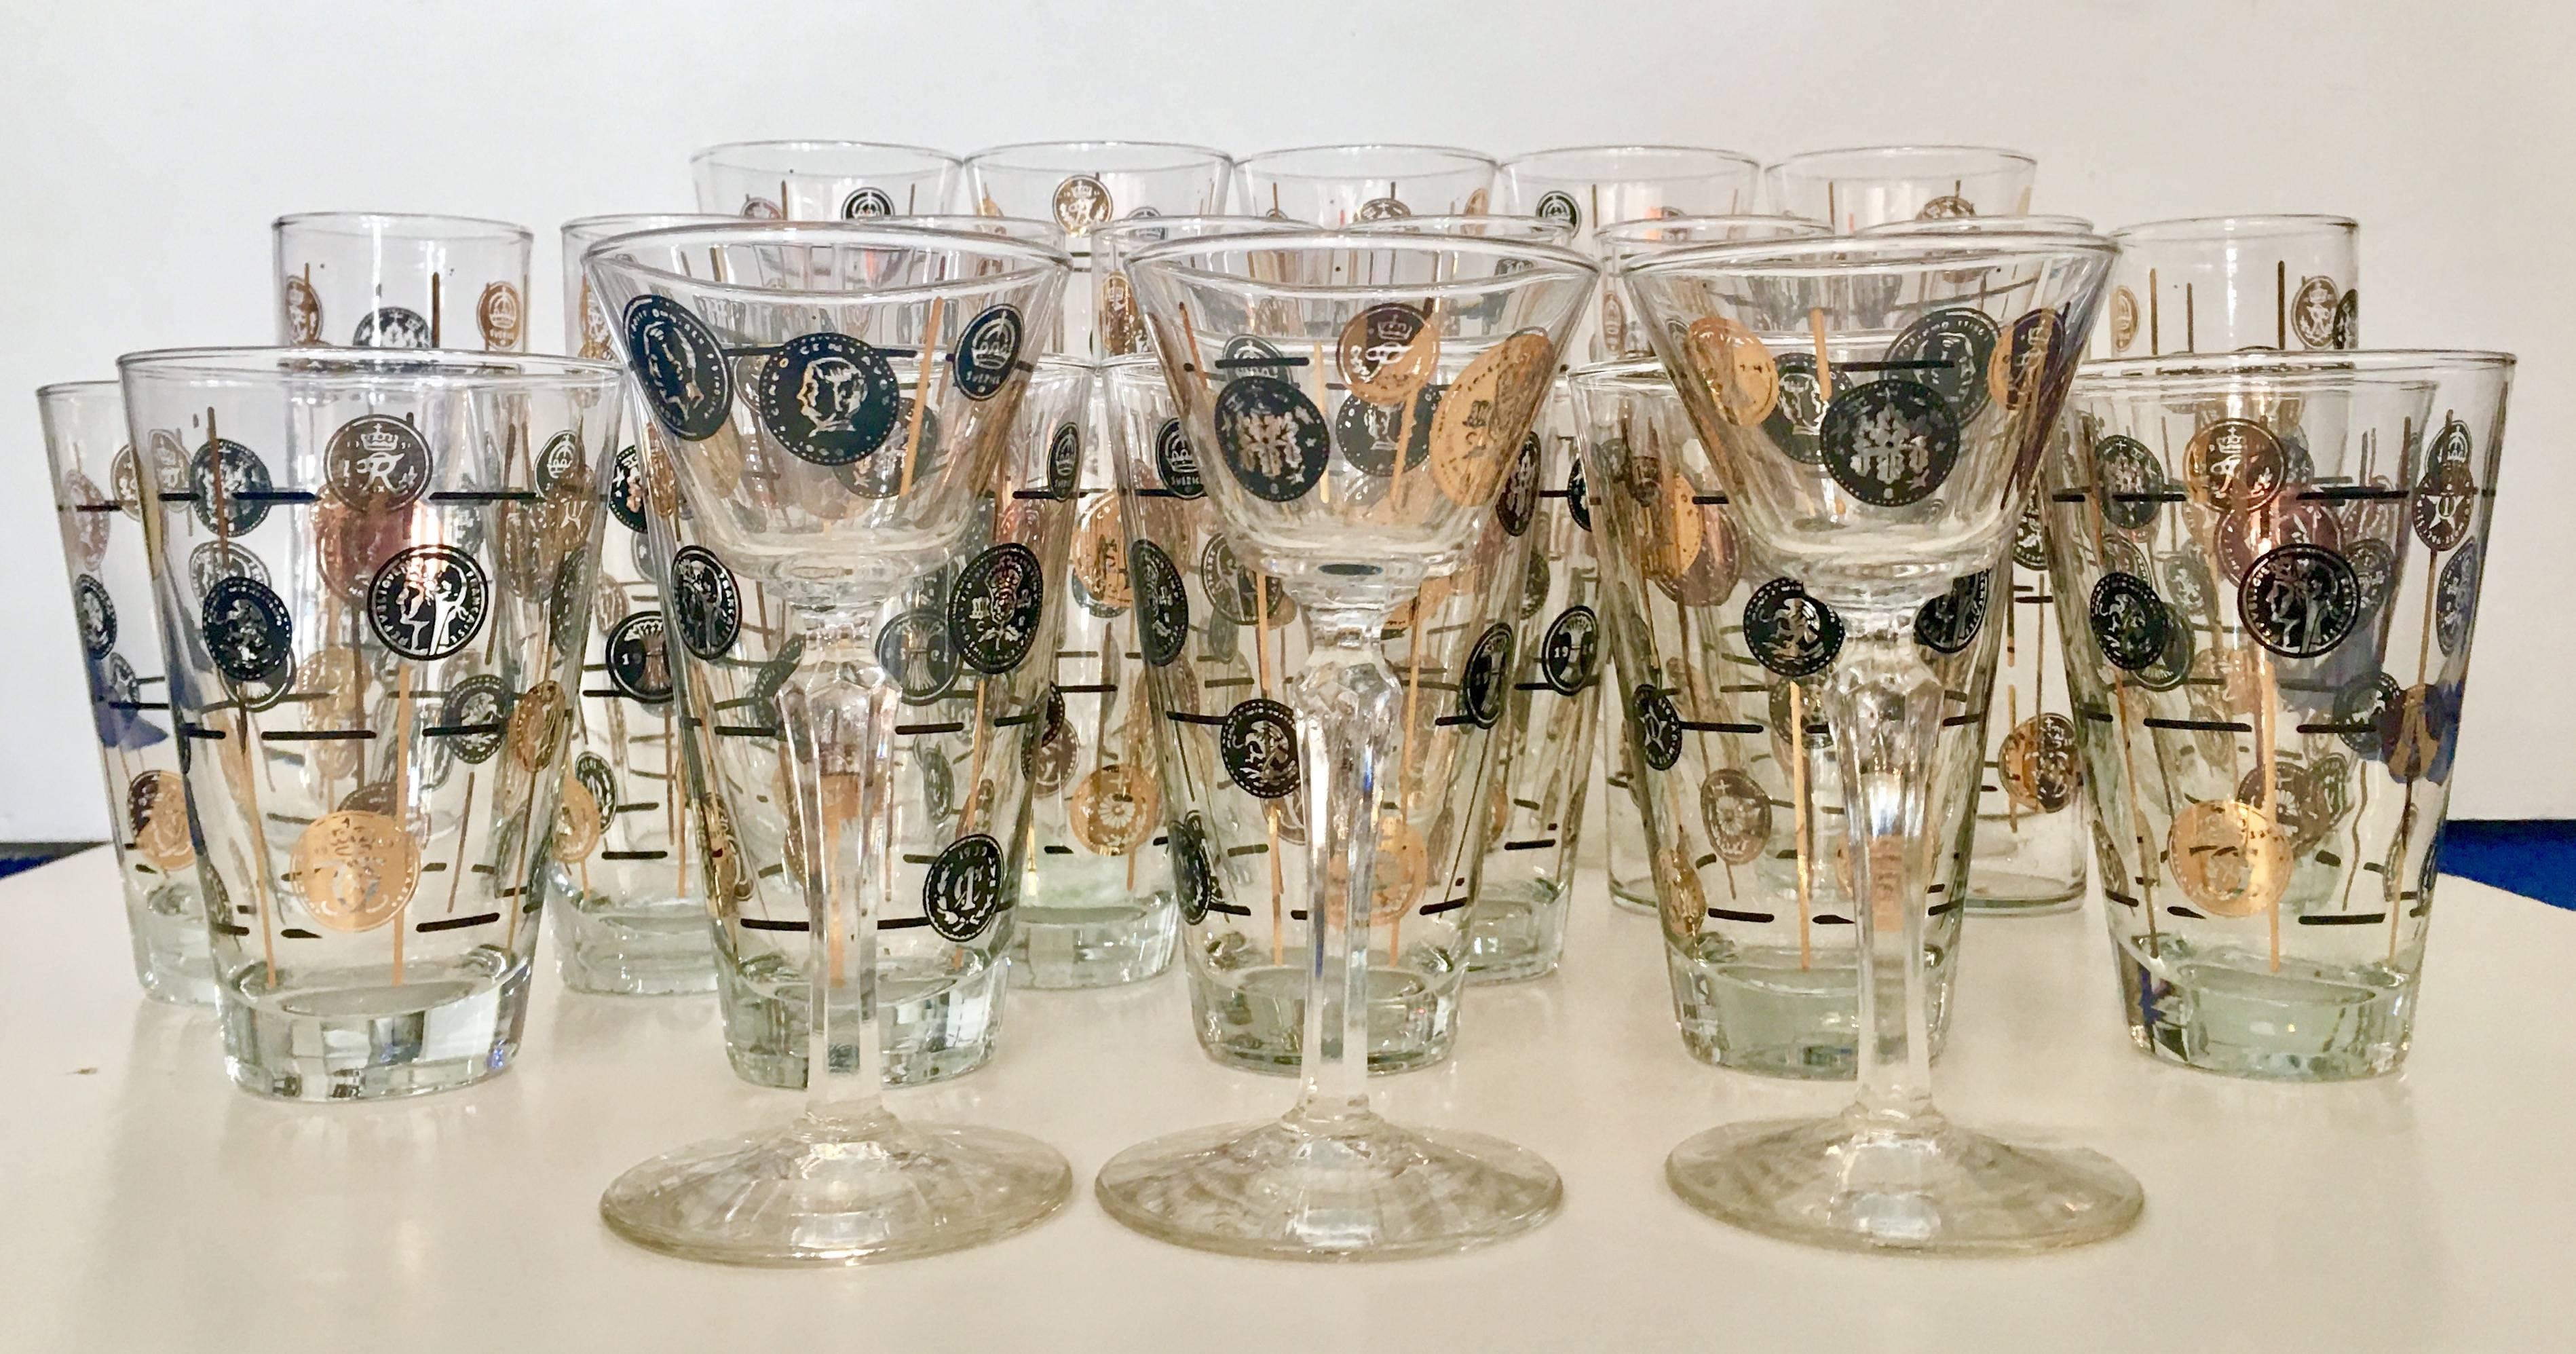 Mid-Century "Coin" 22-karat gold detail 27-piece glass drinks set.
Set includes, eleven high ball glasses, eight Tom Collins glasses, five pilsner/beer footed glasses, three martini/coupe stem glasses.
Measurements:
High ball 5.5"